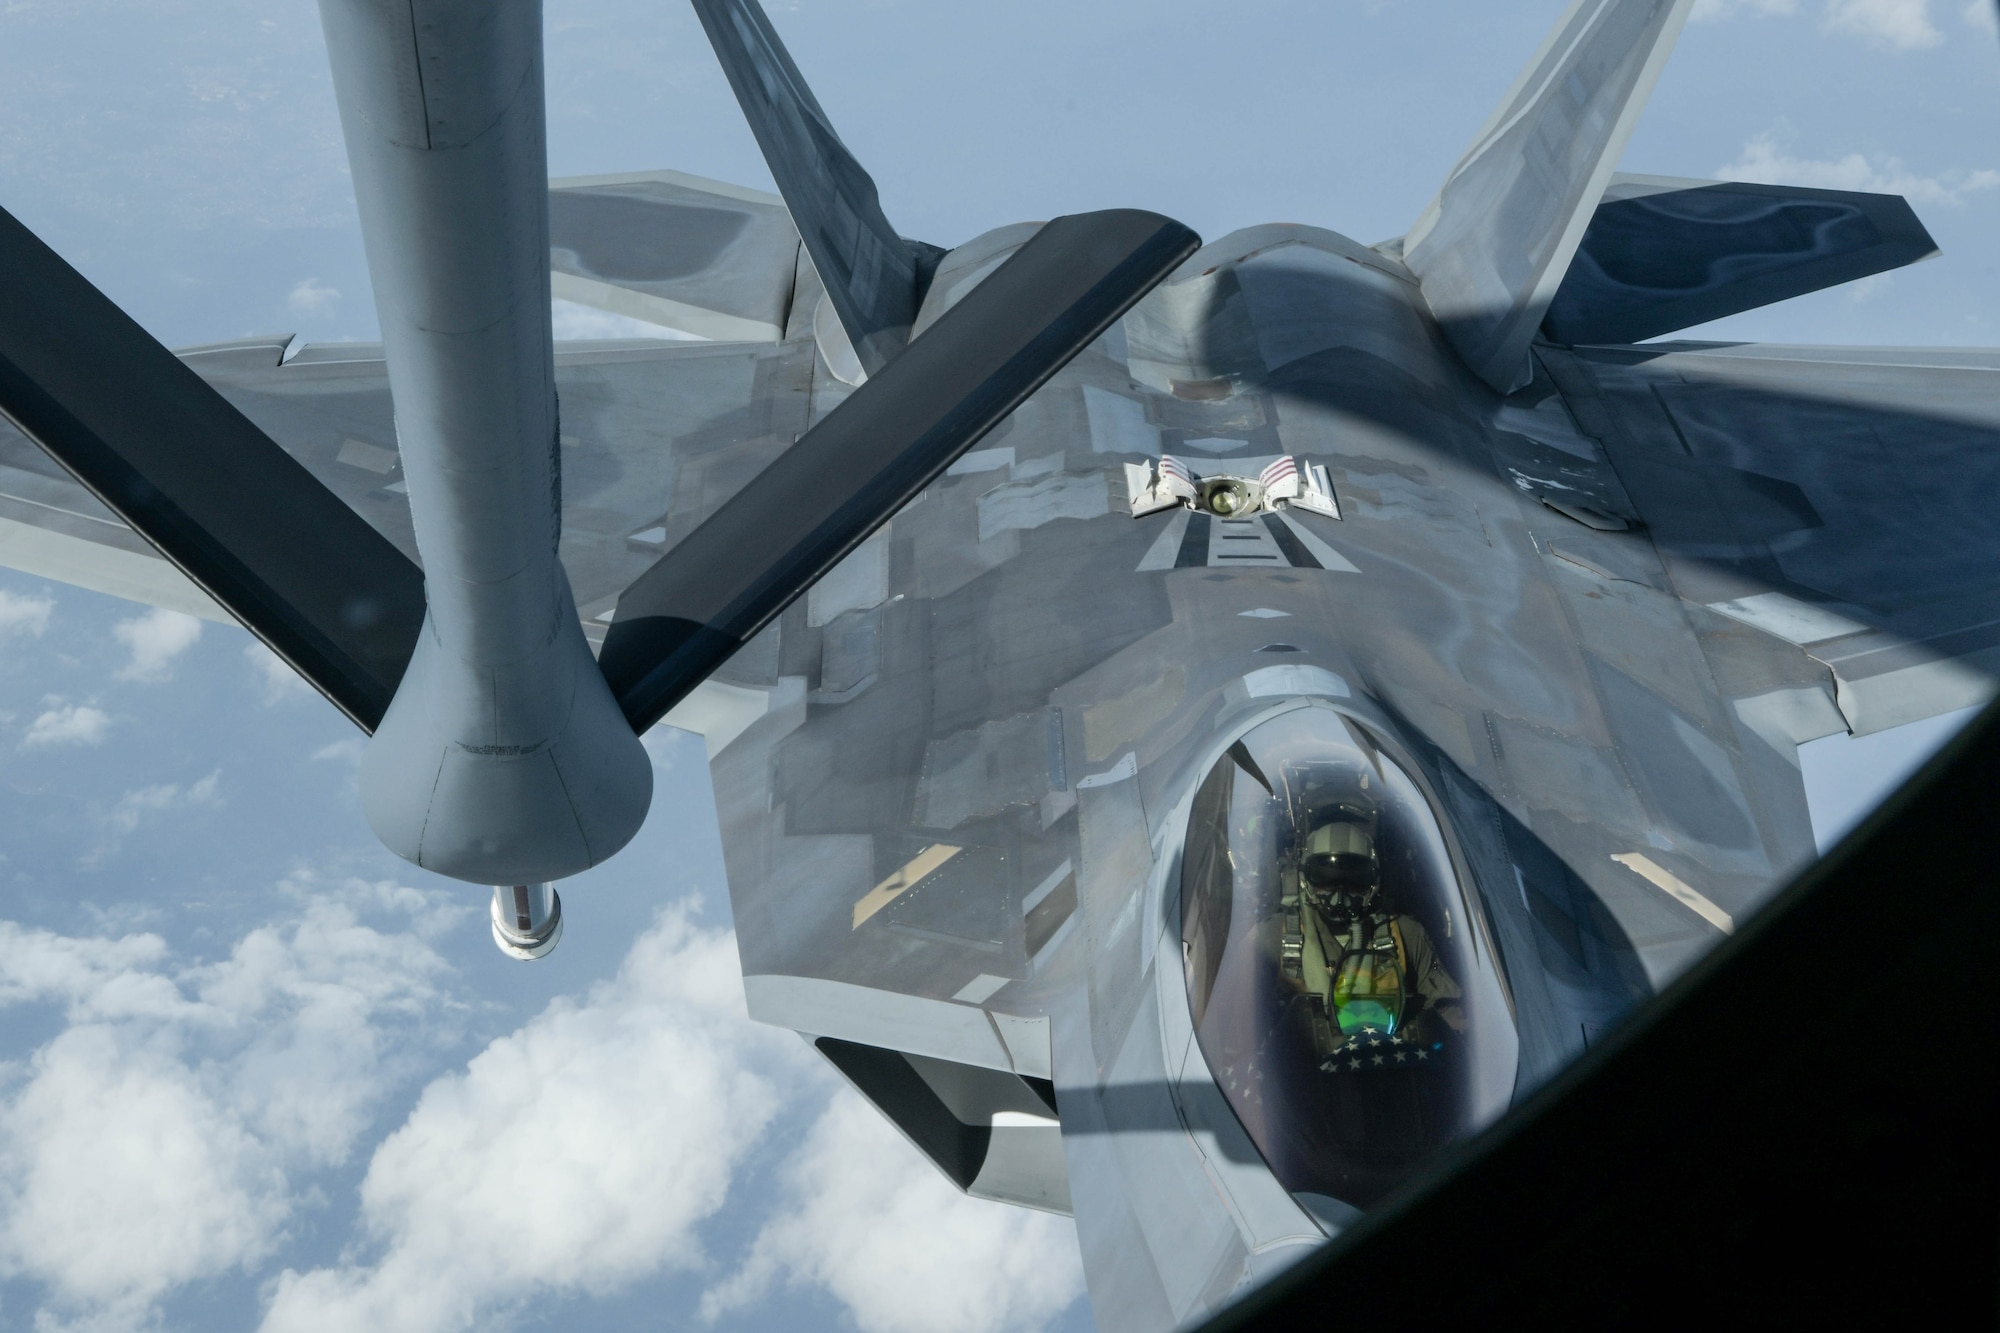 A U.S. Air Force F-22 Raptor, from the 199th Fighter Squadron, is being refueled by a KC-135 Stratotanker, from the 909th Air Refueling Squadron, during a 5th generation fighter operation near Japan, April 1, 2021. The F-22 Raptors are currently operating out of Marine Corps Air Station Iwakuni, Japan, to support U.S. Indo-Pacific Command’s dynamic force employment concept. (U.S. Air Force photo by Senior Airman Rebeckah Medeiros)